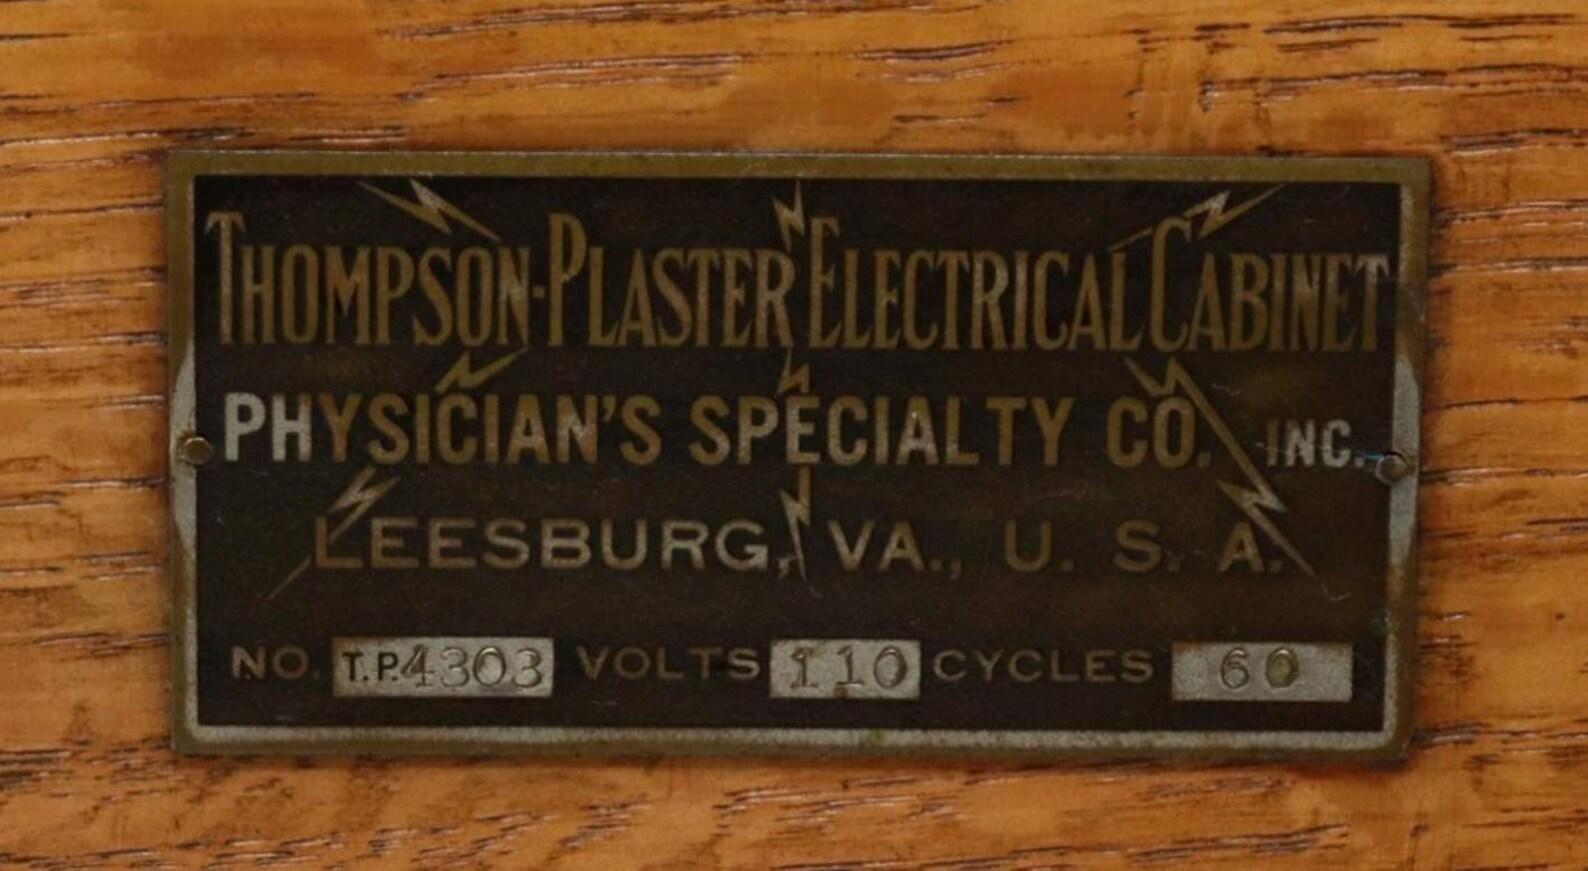 Glass Unusual Early American Quack Medicine Thompson-Plaster Electric Cabinet For Sale